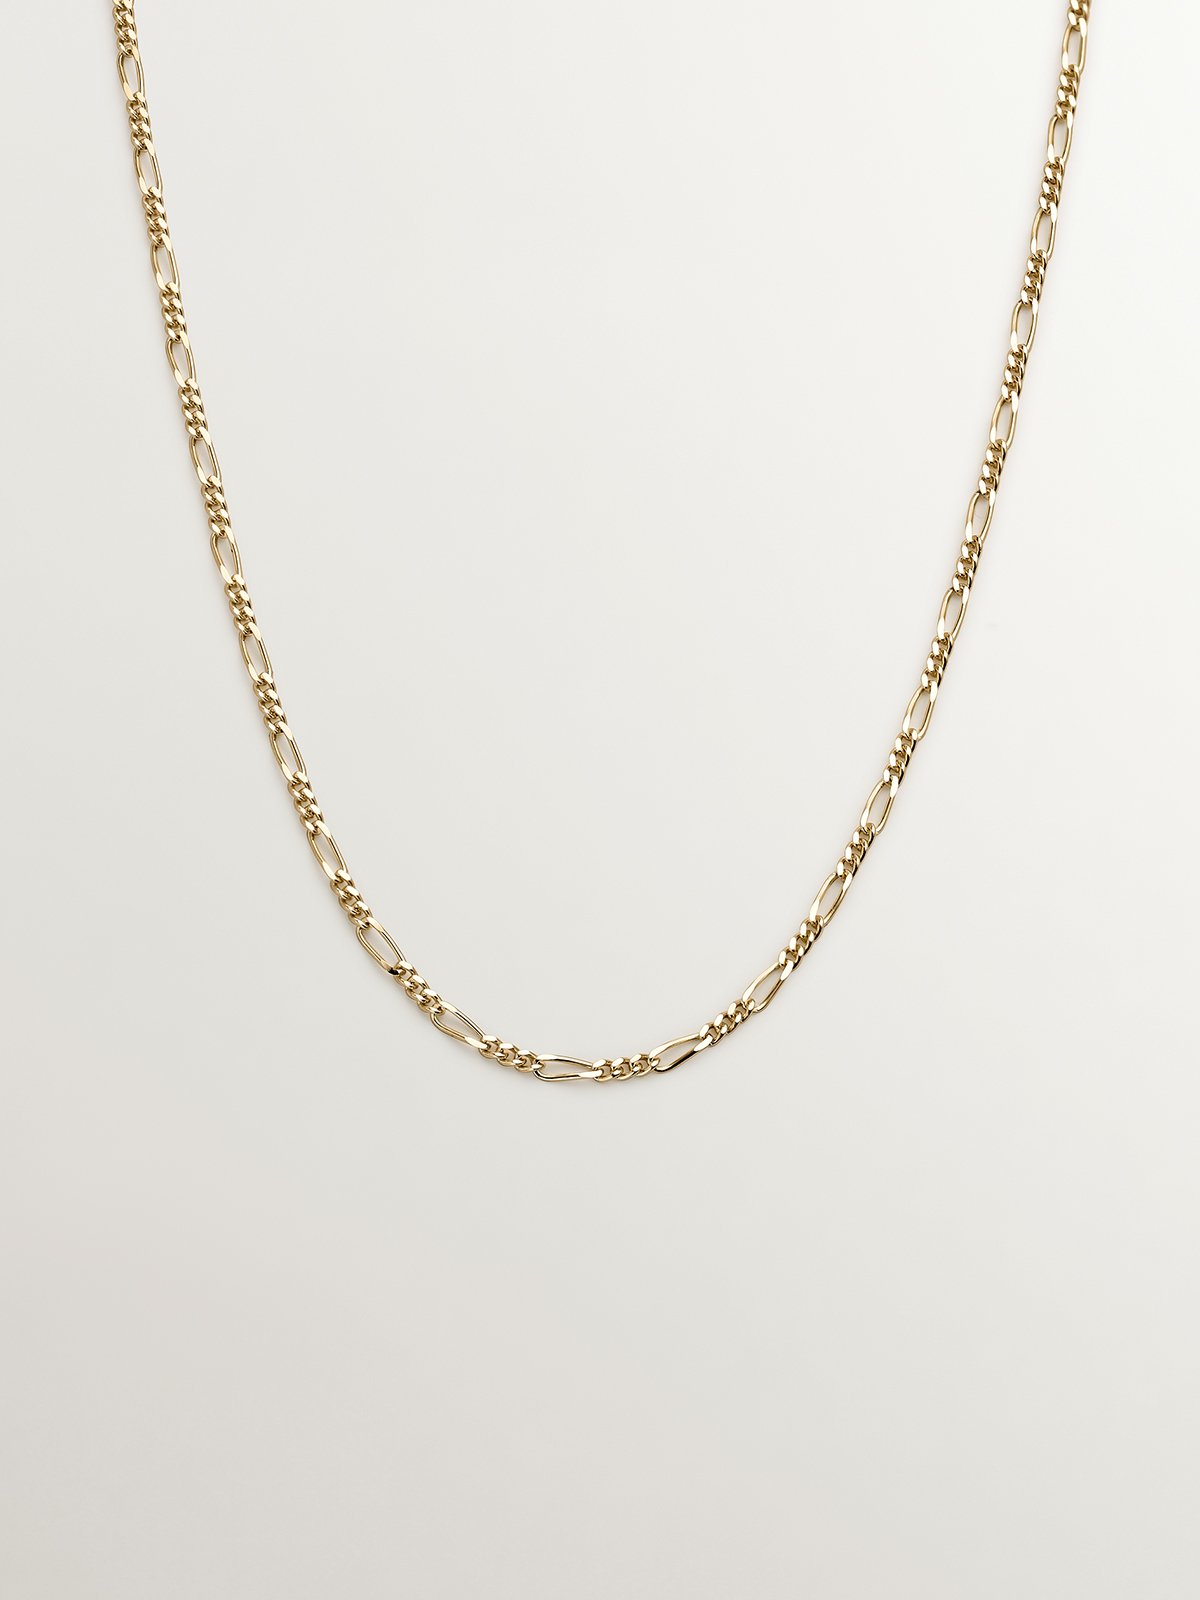 Fine Figaro link chain in 9K yellow gold